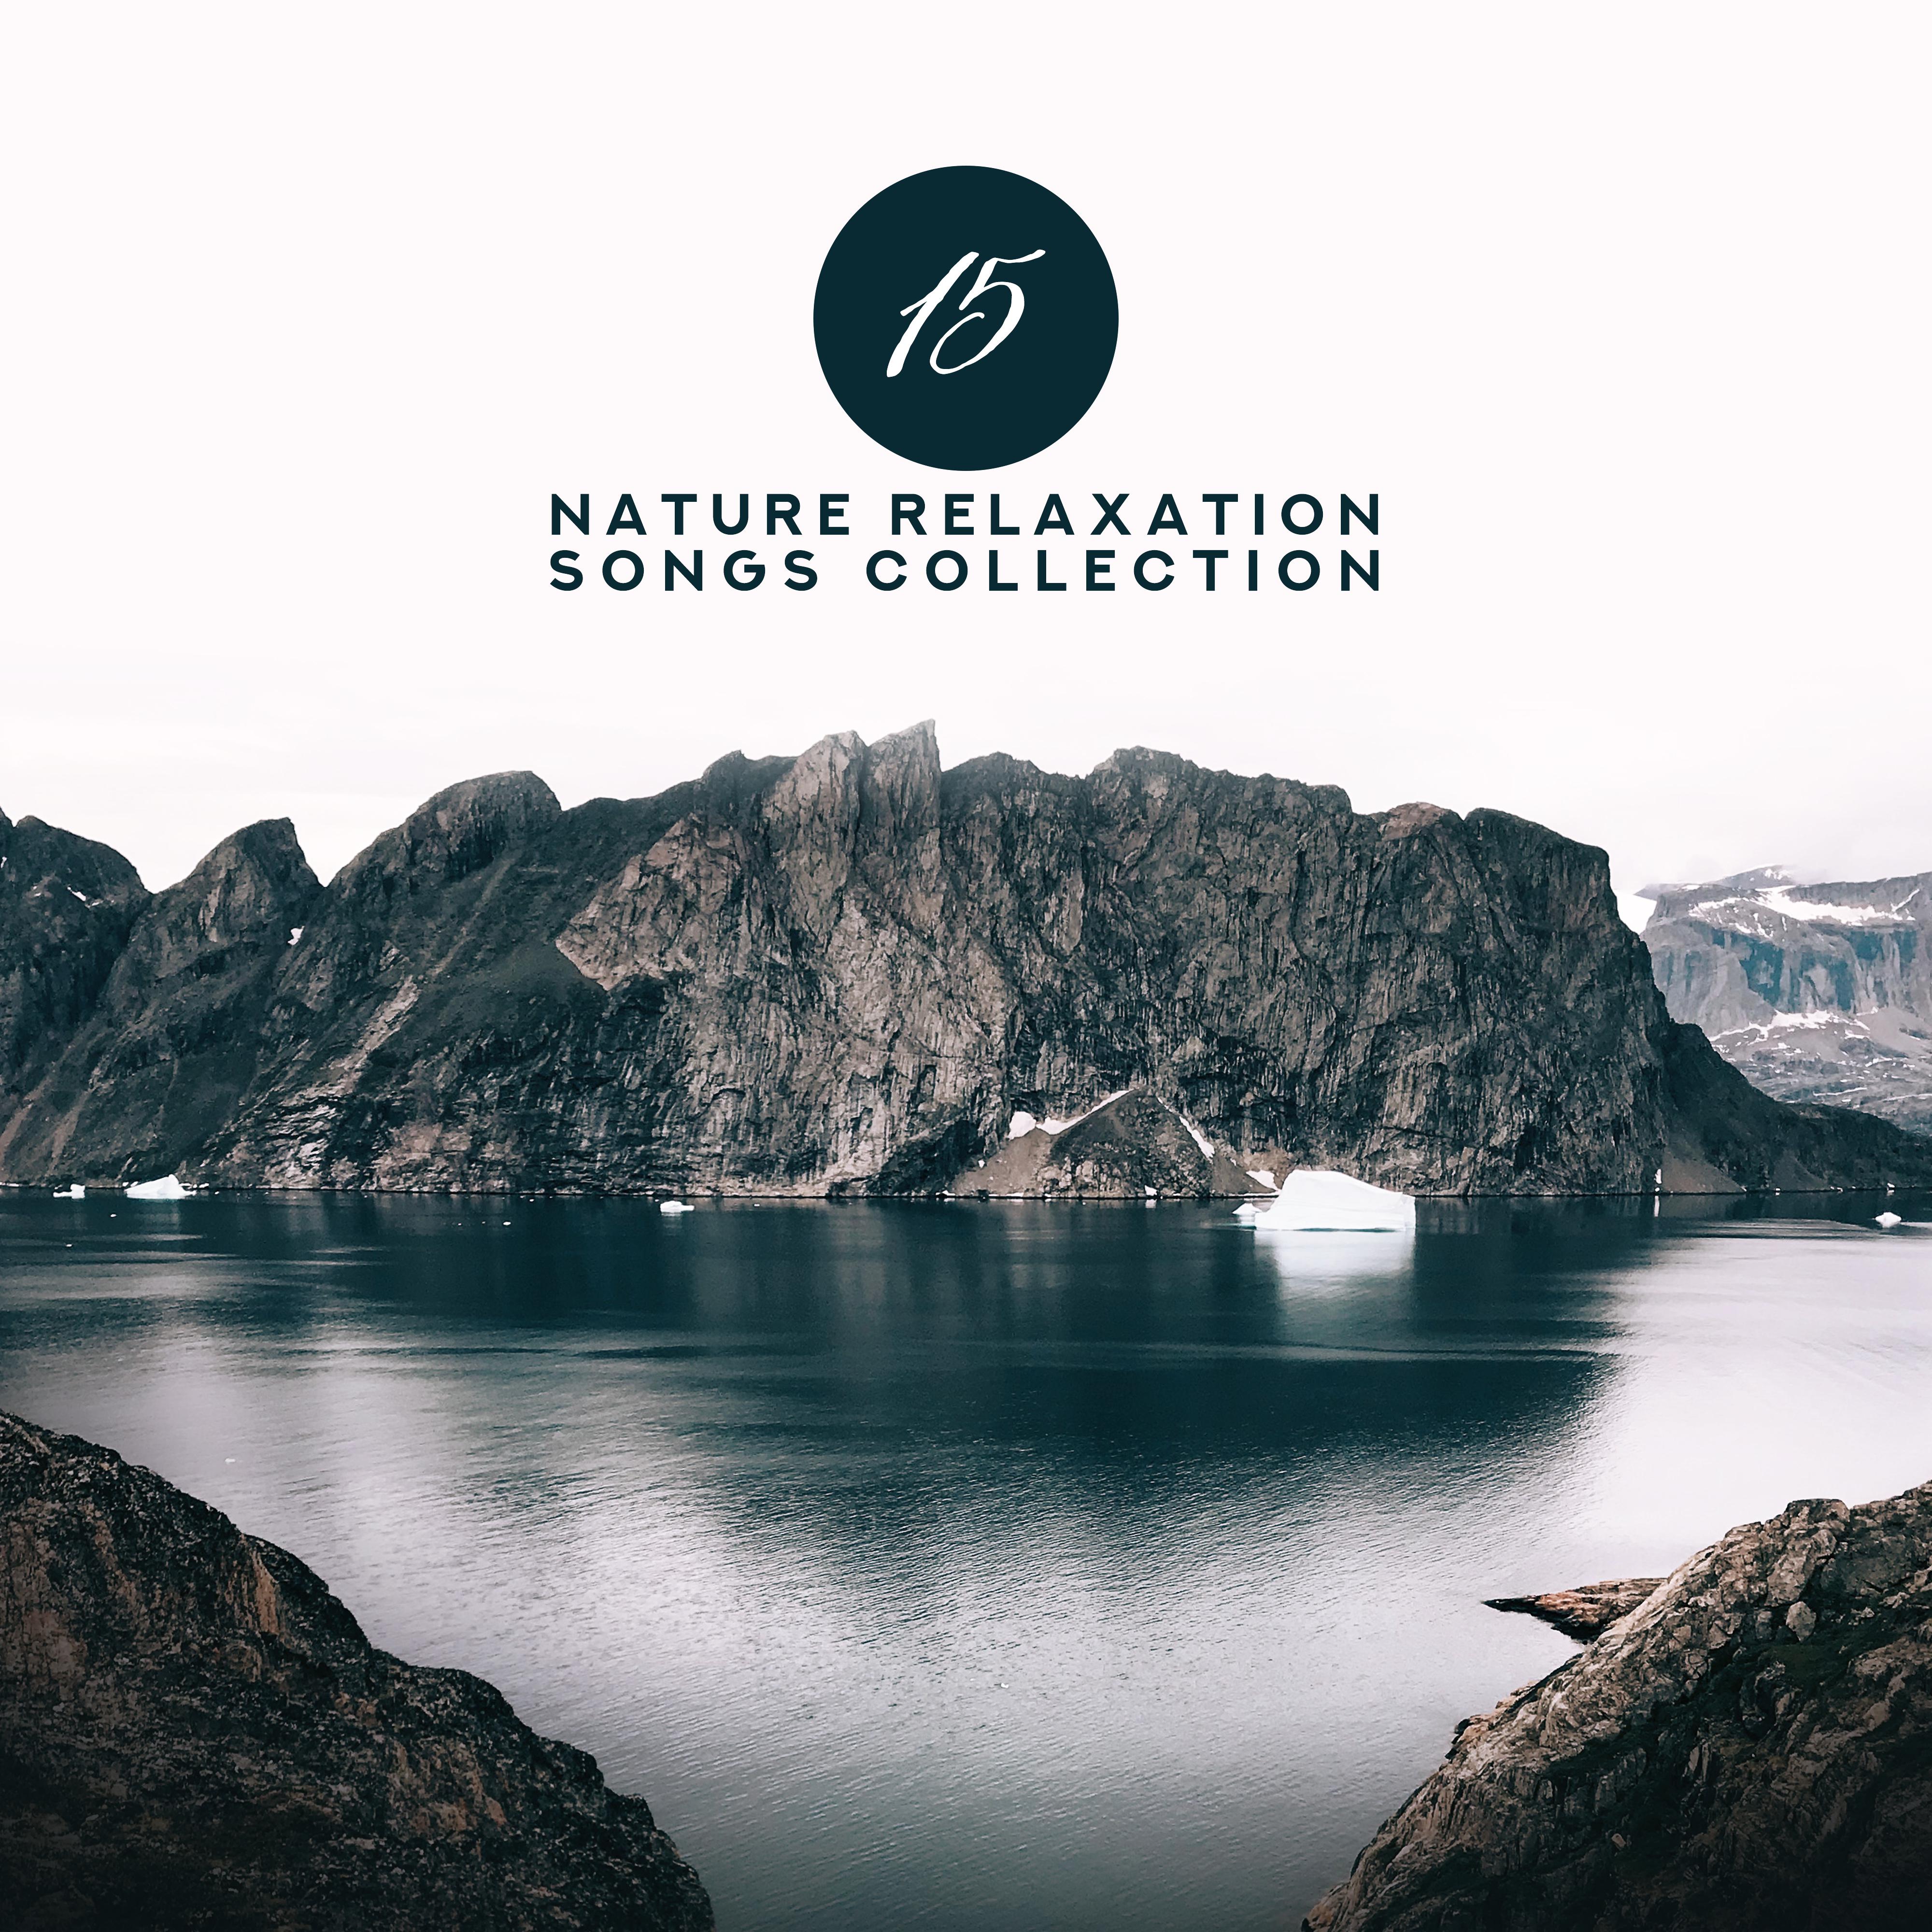 15 Nature Relaxation Songs Collection: 2019 New Age Music for Relax, Total Calm Down, Stress Relief